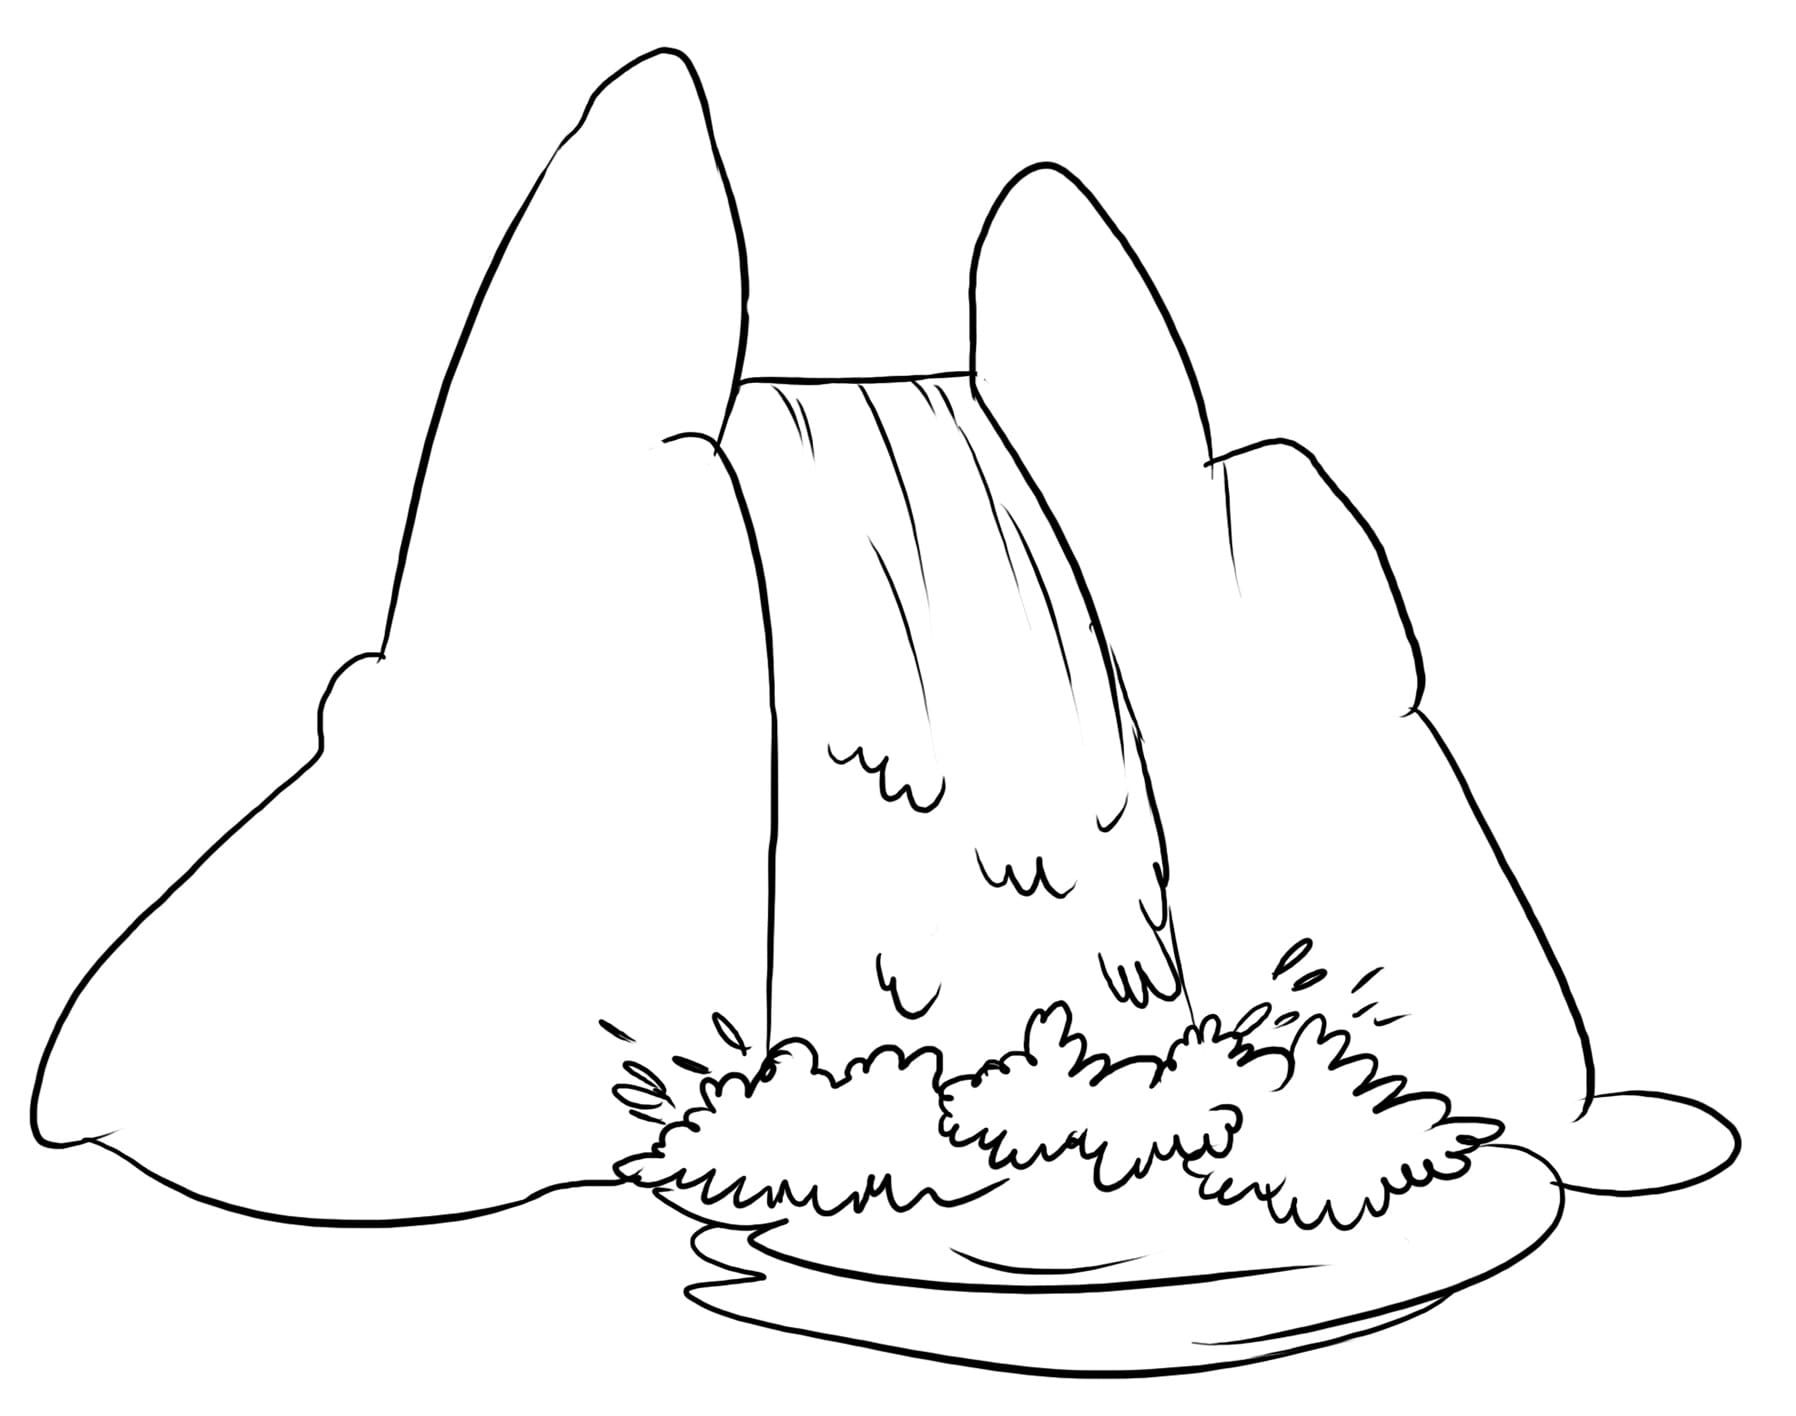 Source Waterfall coloring page - Download, Print or Color Online for Free